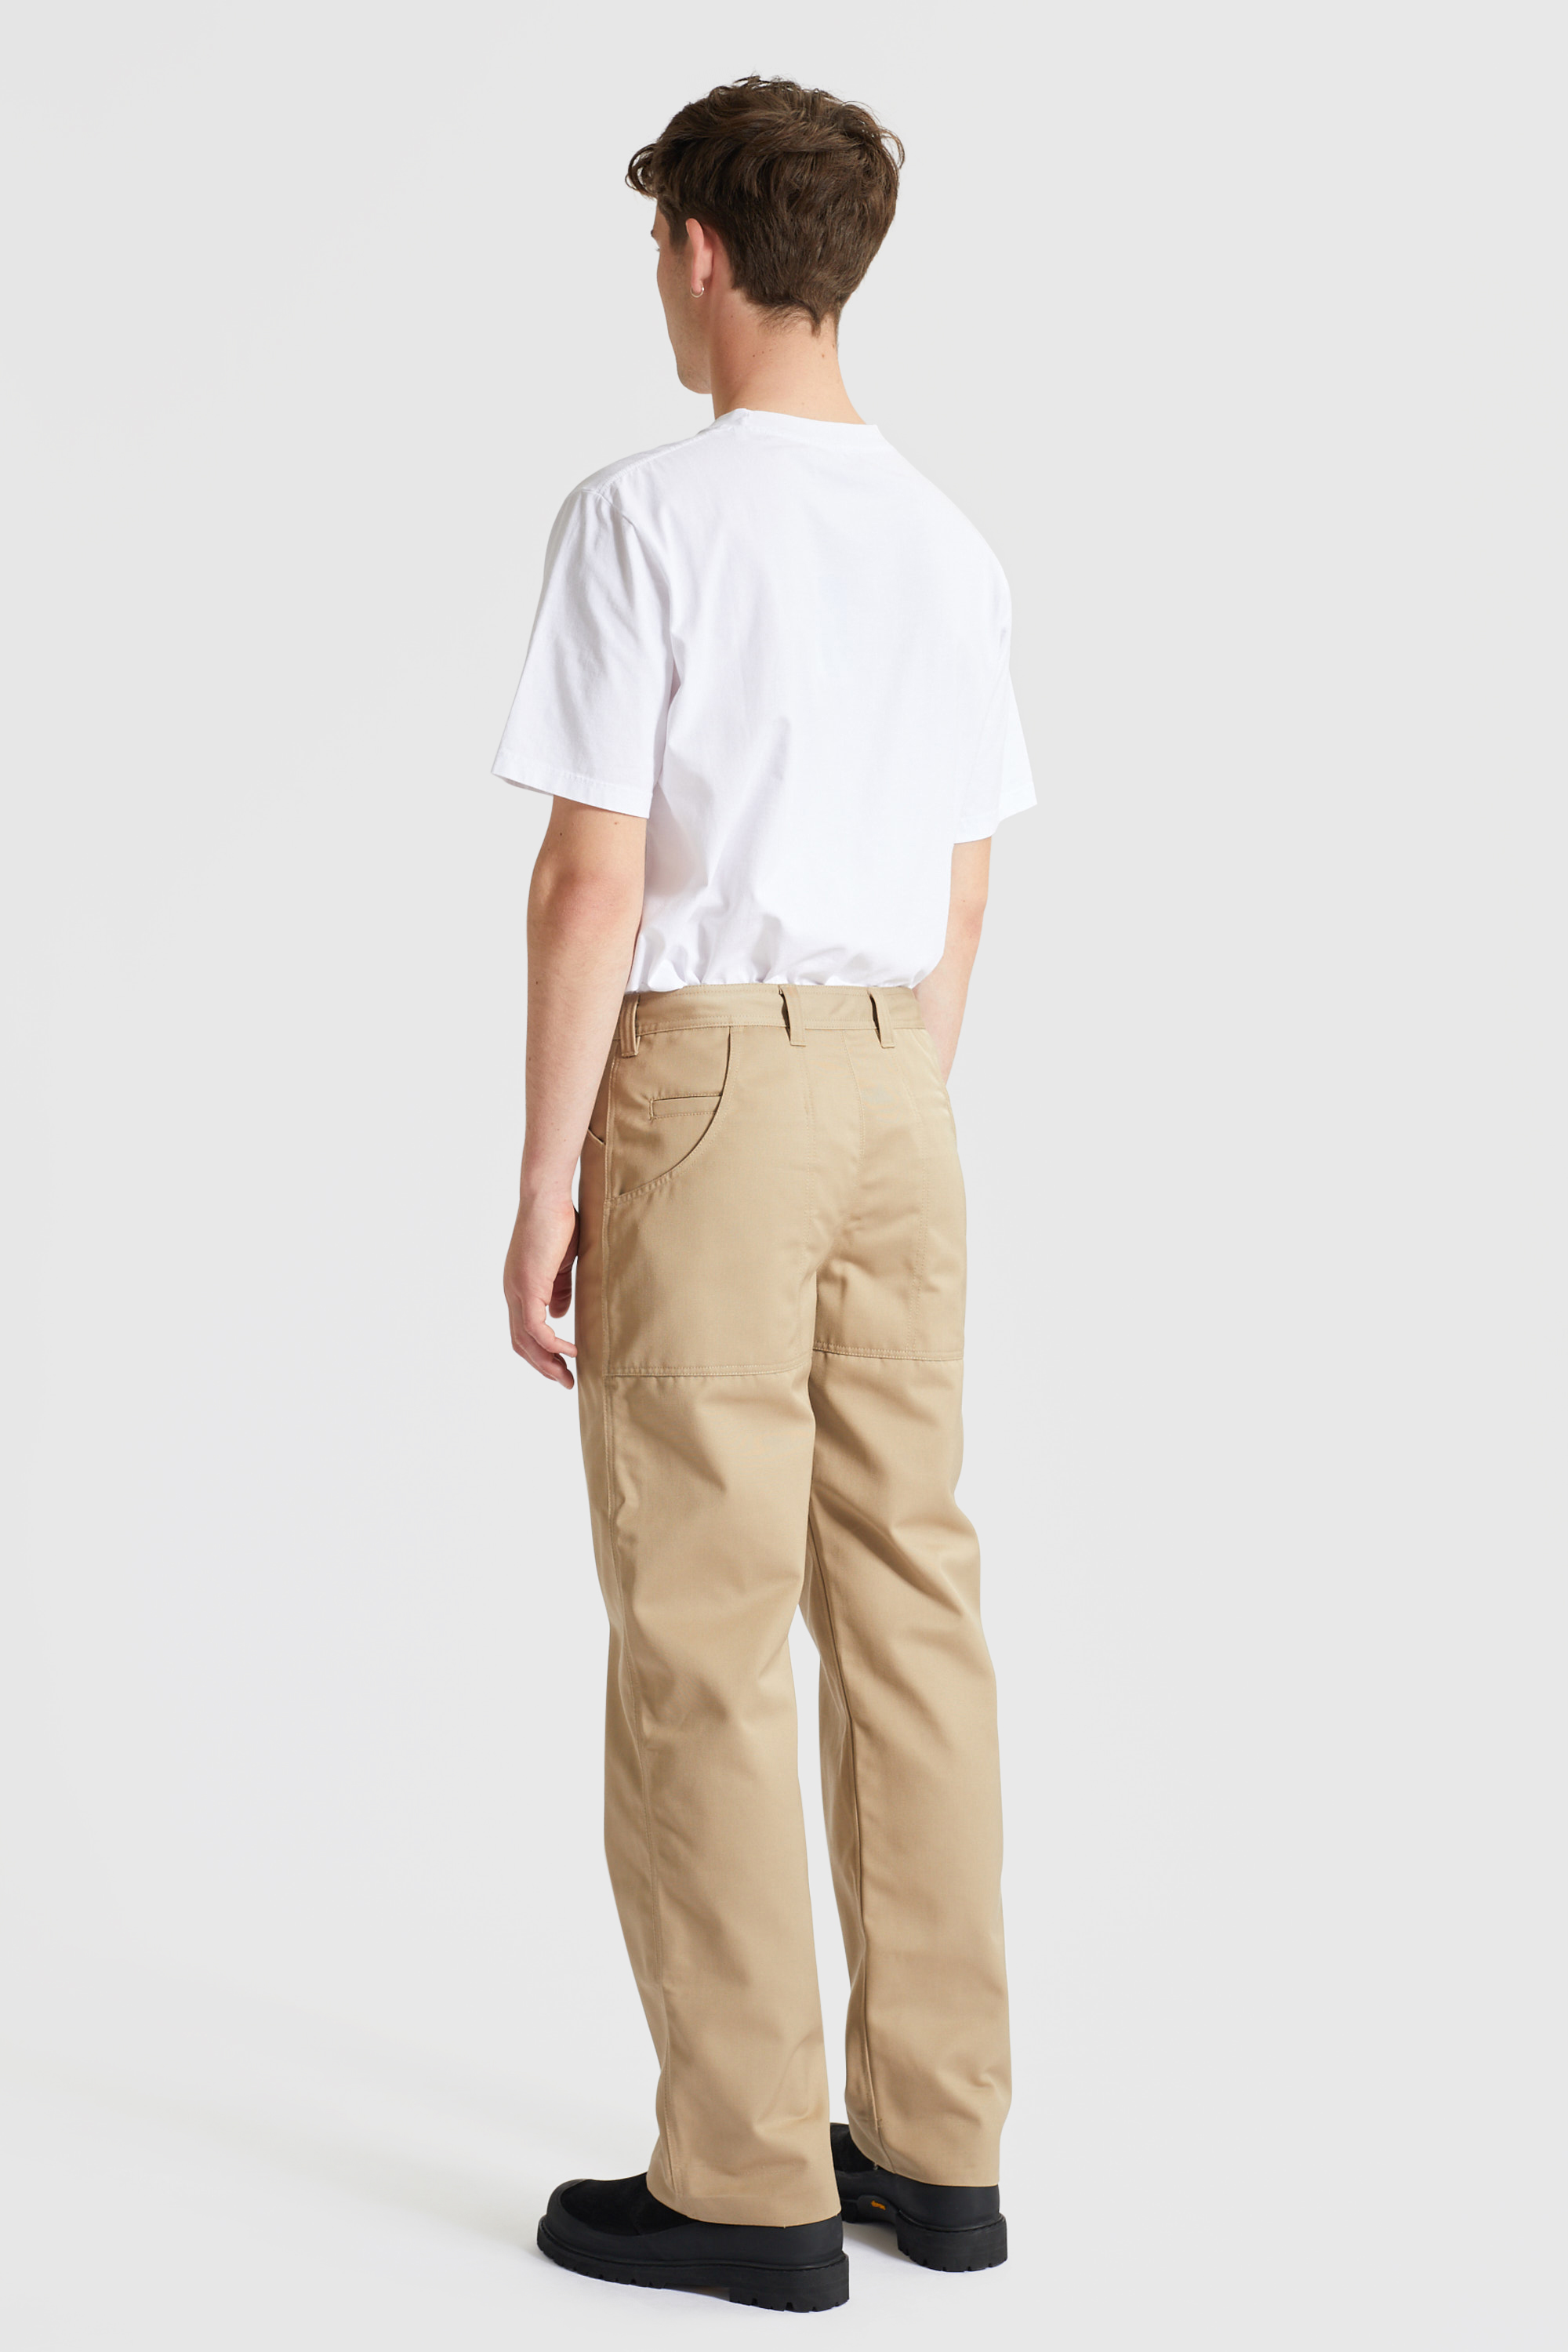 34 Heritage Mens Charisma Relaxed Straight Chino In Khaki Twill